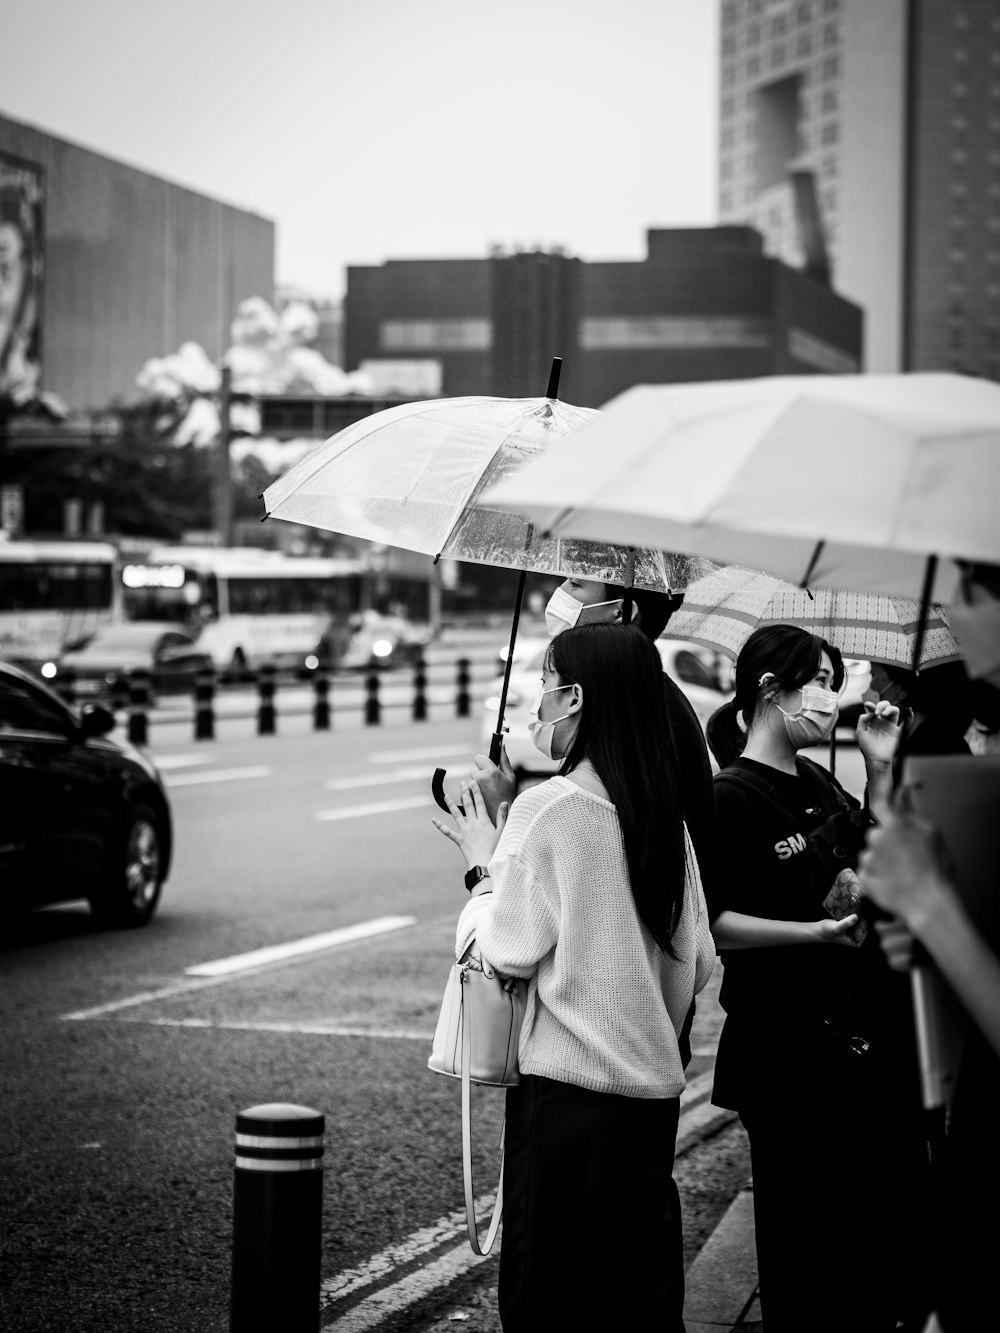 grayscale photo of woman in white coat holding umbrella